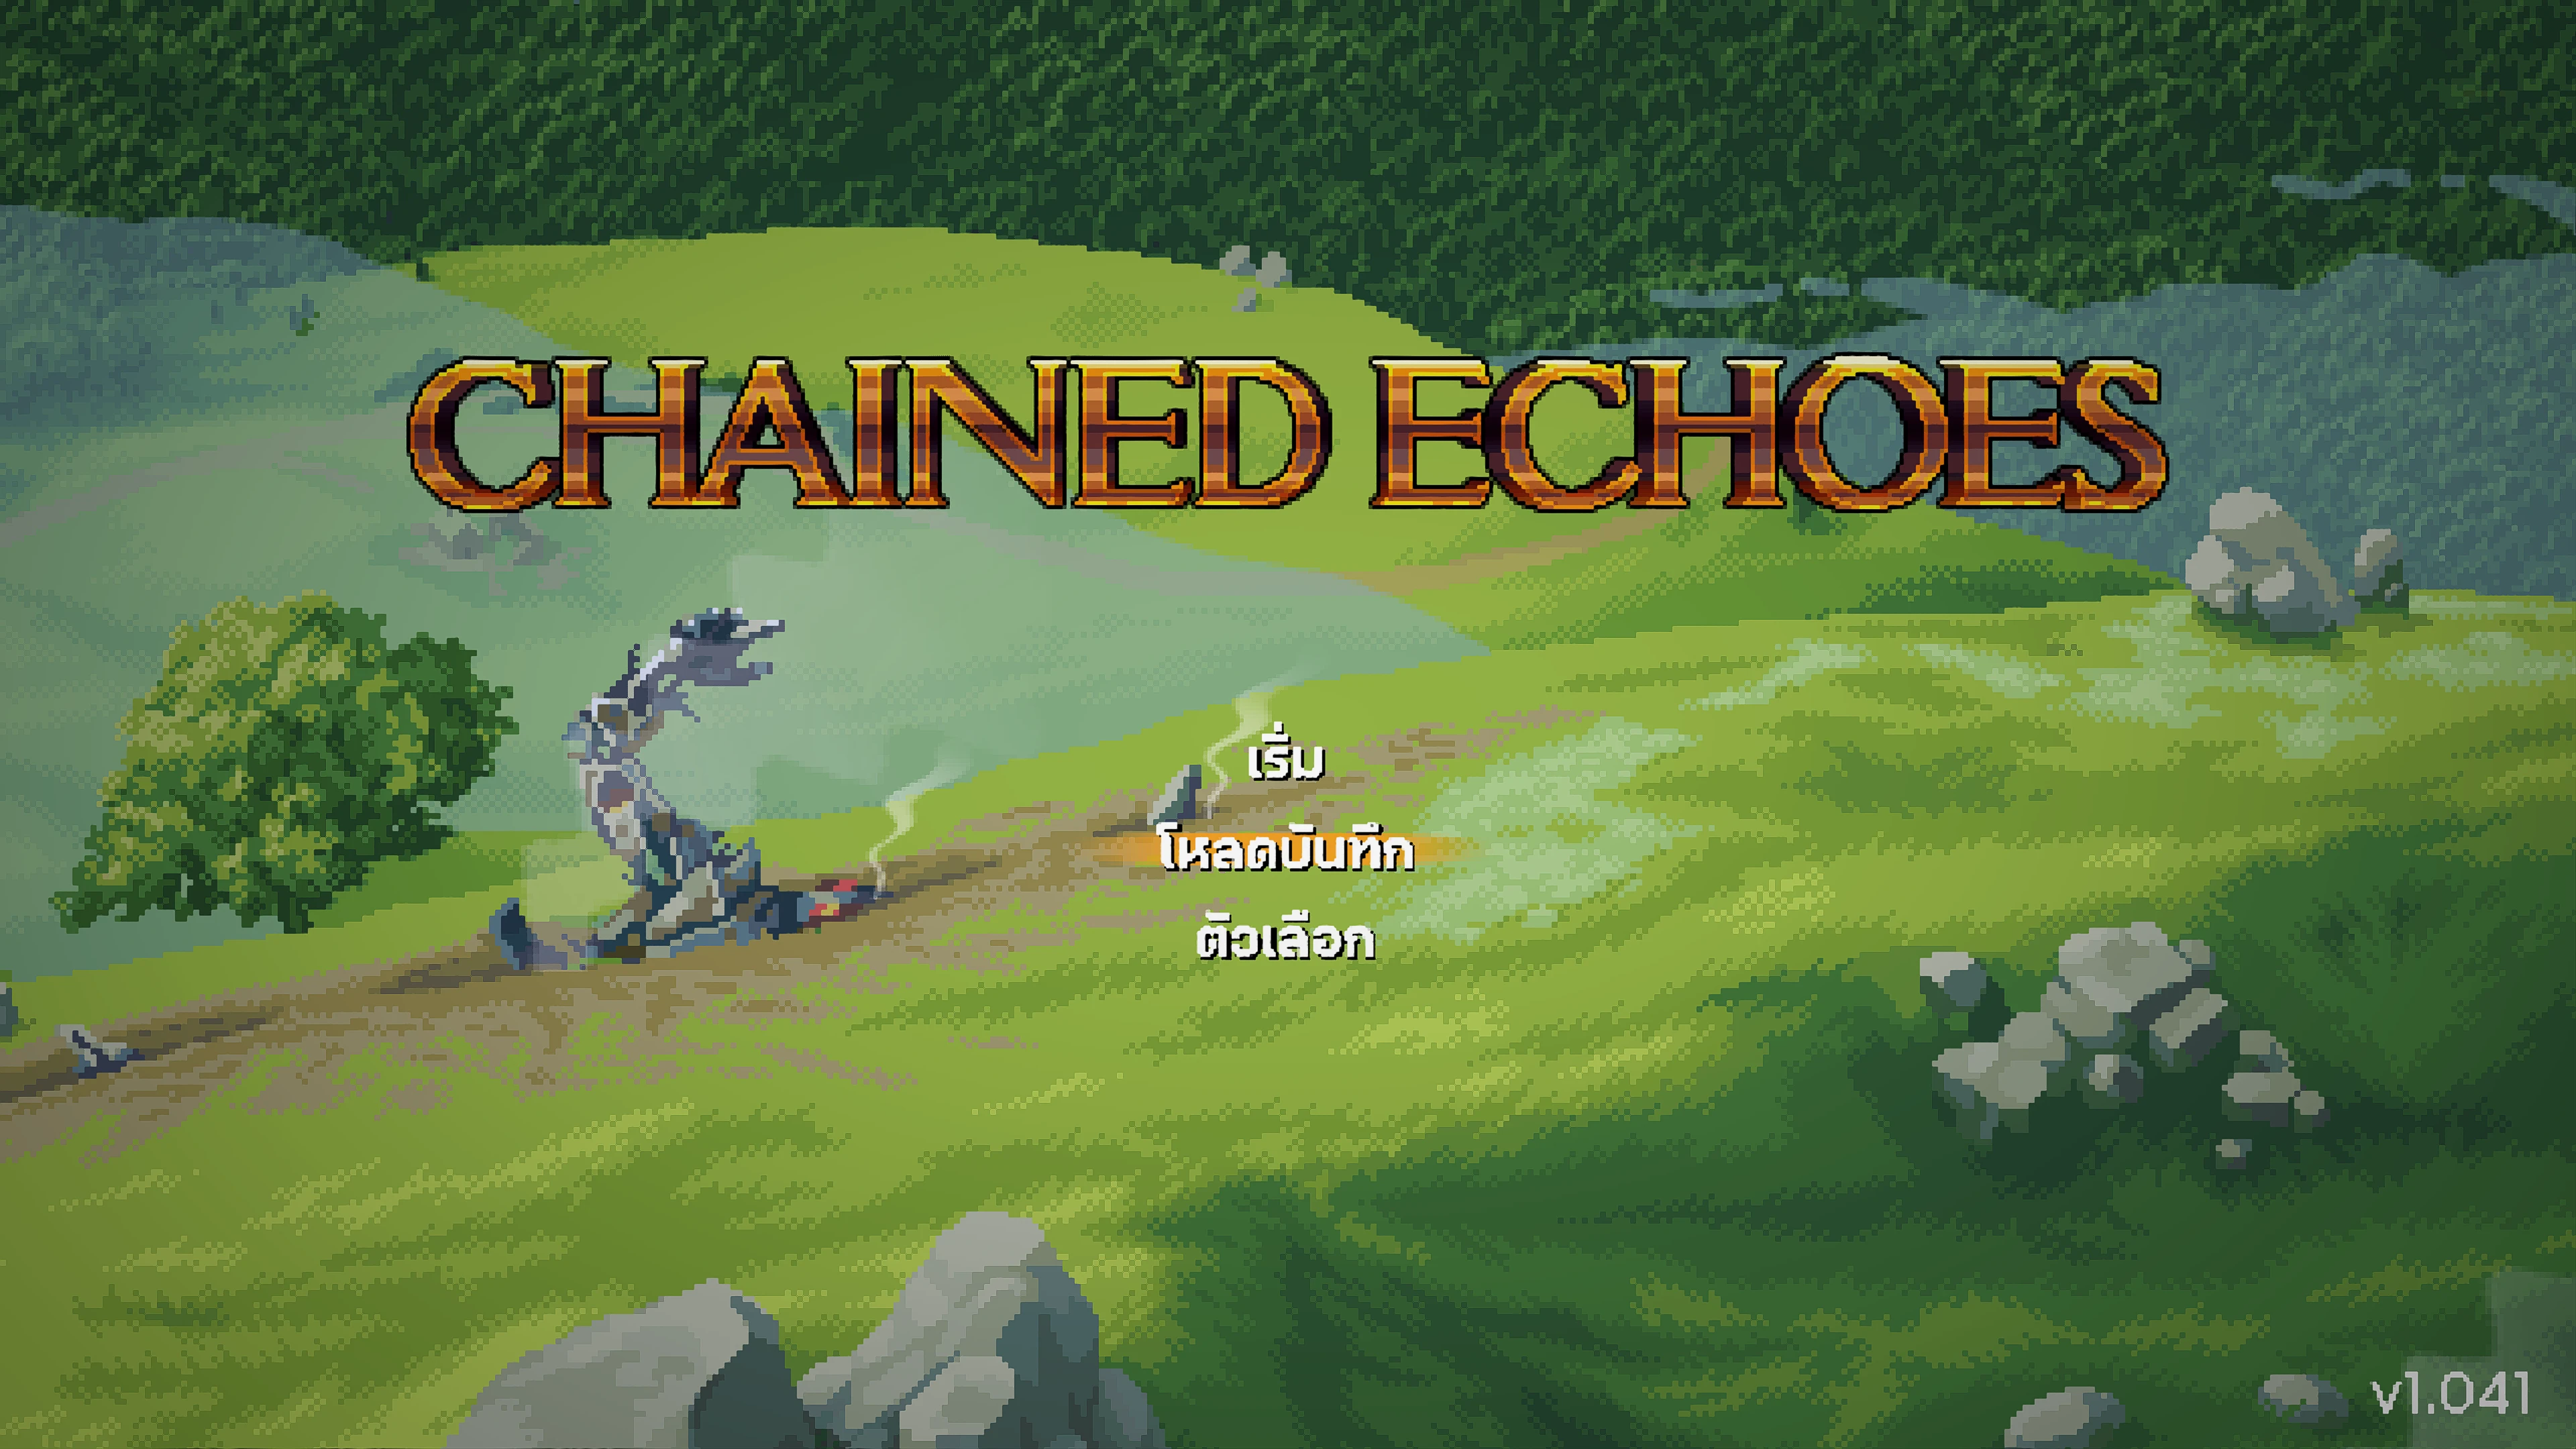 Skippable Splash Screen for Chained Echoes at Chained Echoes Nexus - Mods  and community